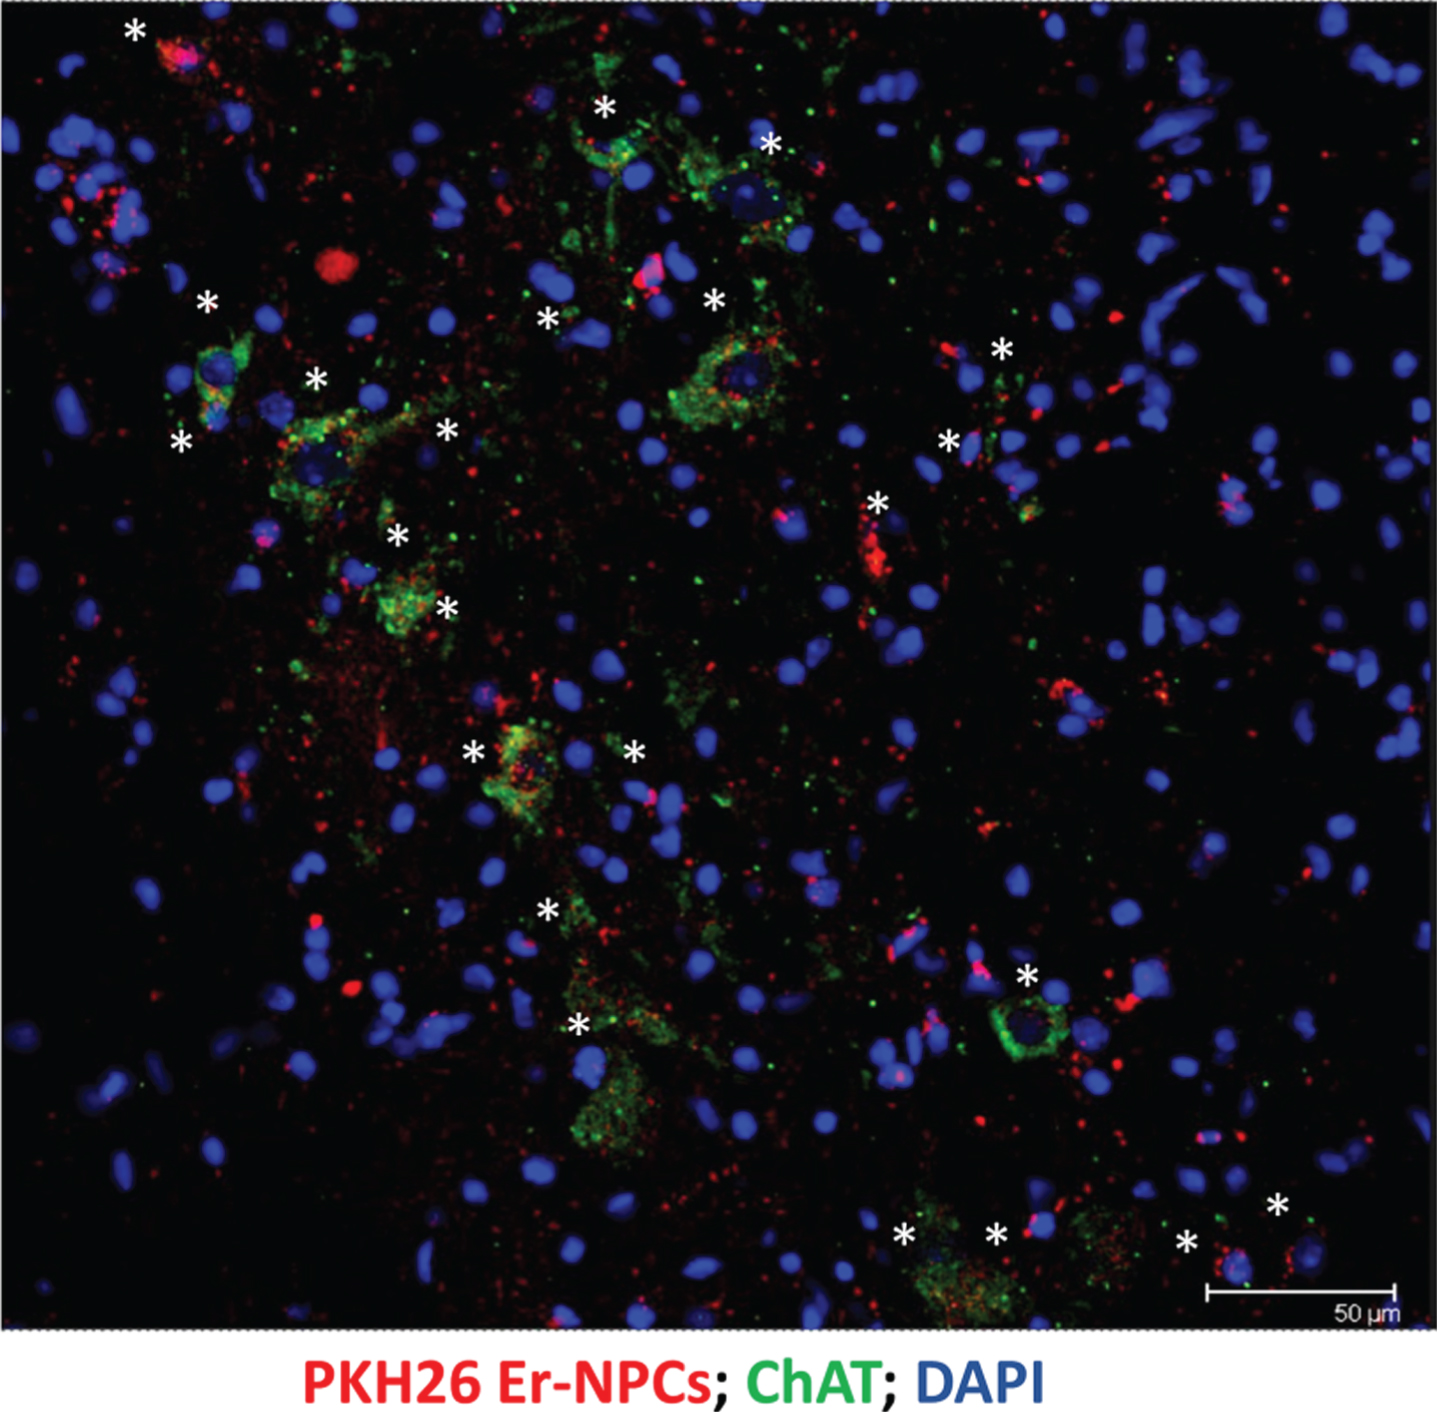 Er-NPCs transplanted cells differentiate into cholinergic neurons. At 30 days after i.v. injection, several PKH26-labeled Er-NPCs (red) were accumulated at the edges of the lesion. Most Er-NPCs were positive for ChAT immunostaining (green; stars) (Scale bar = 50 μm).